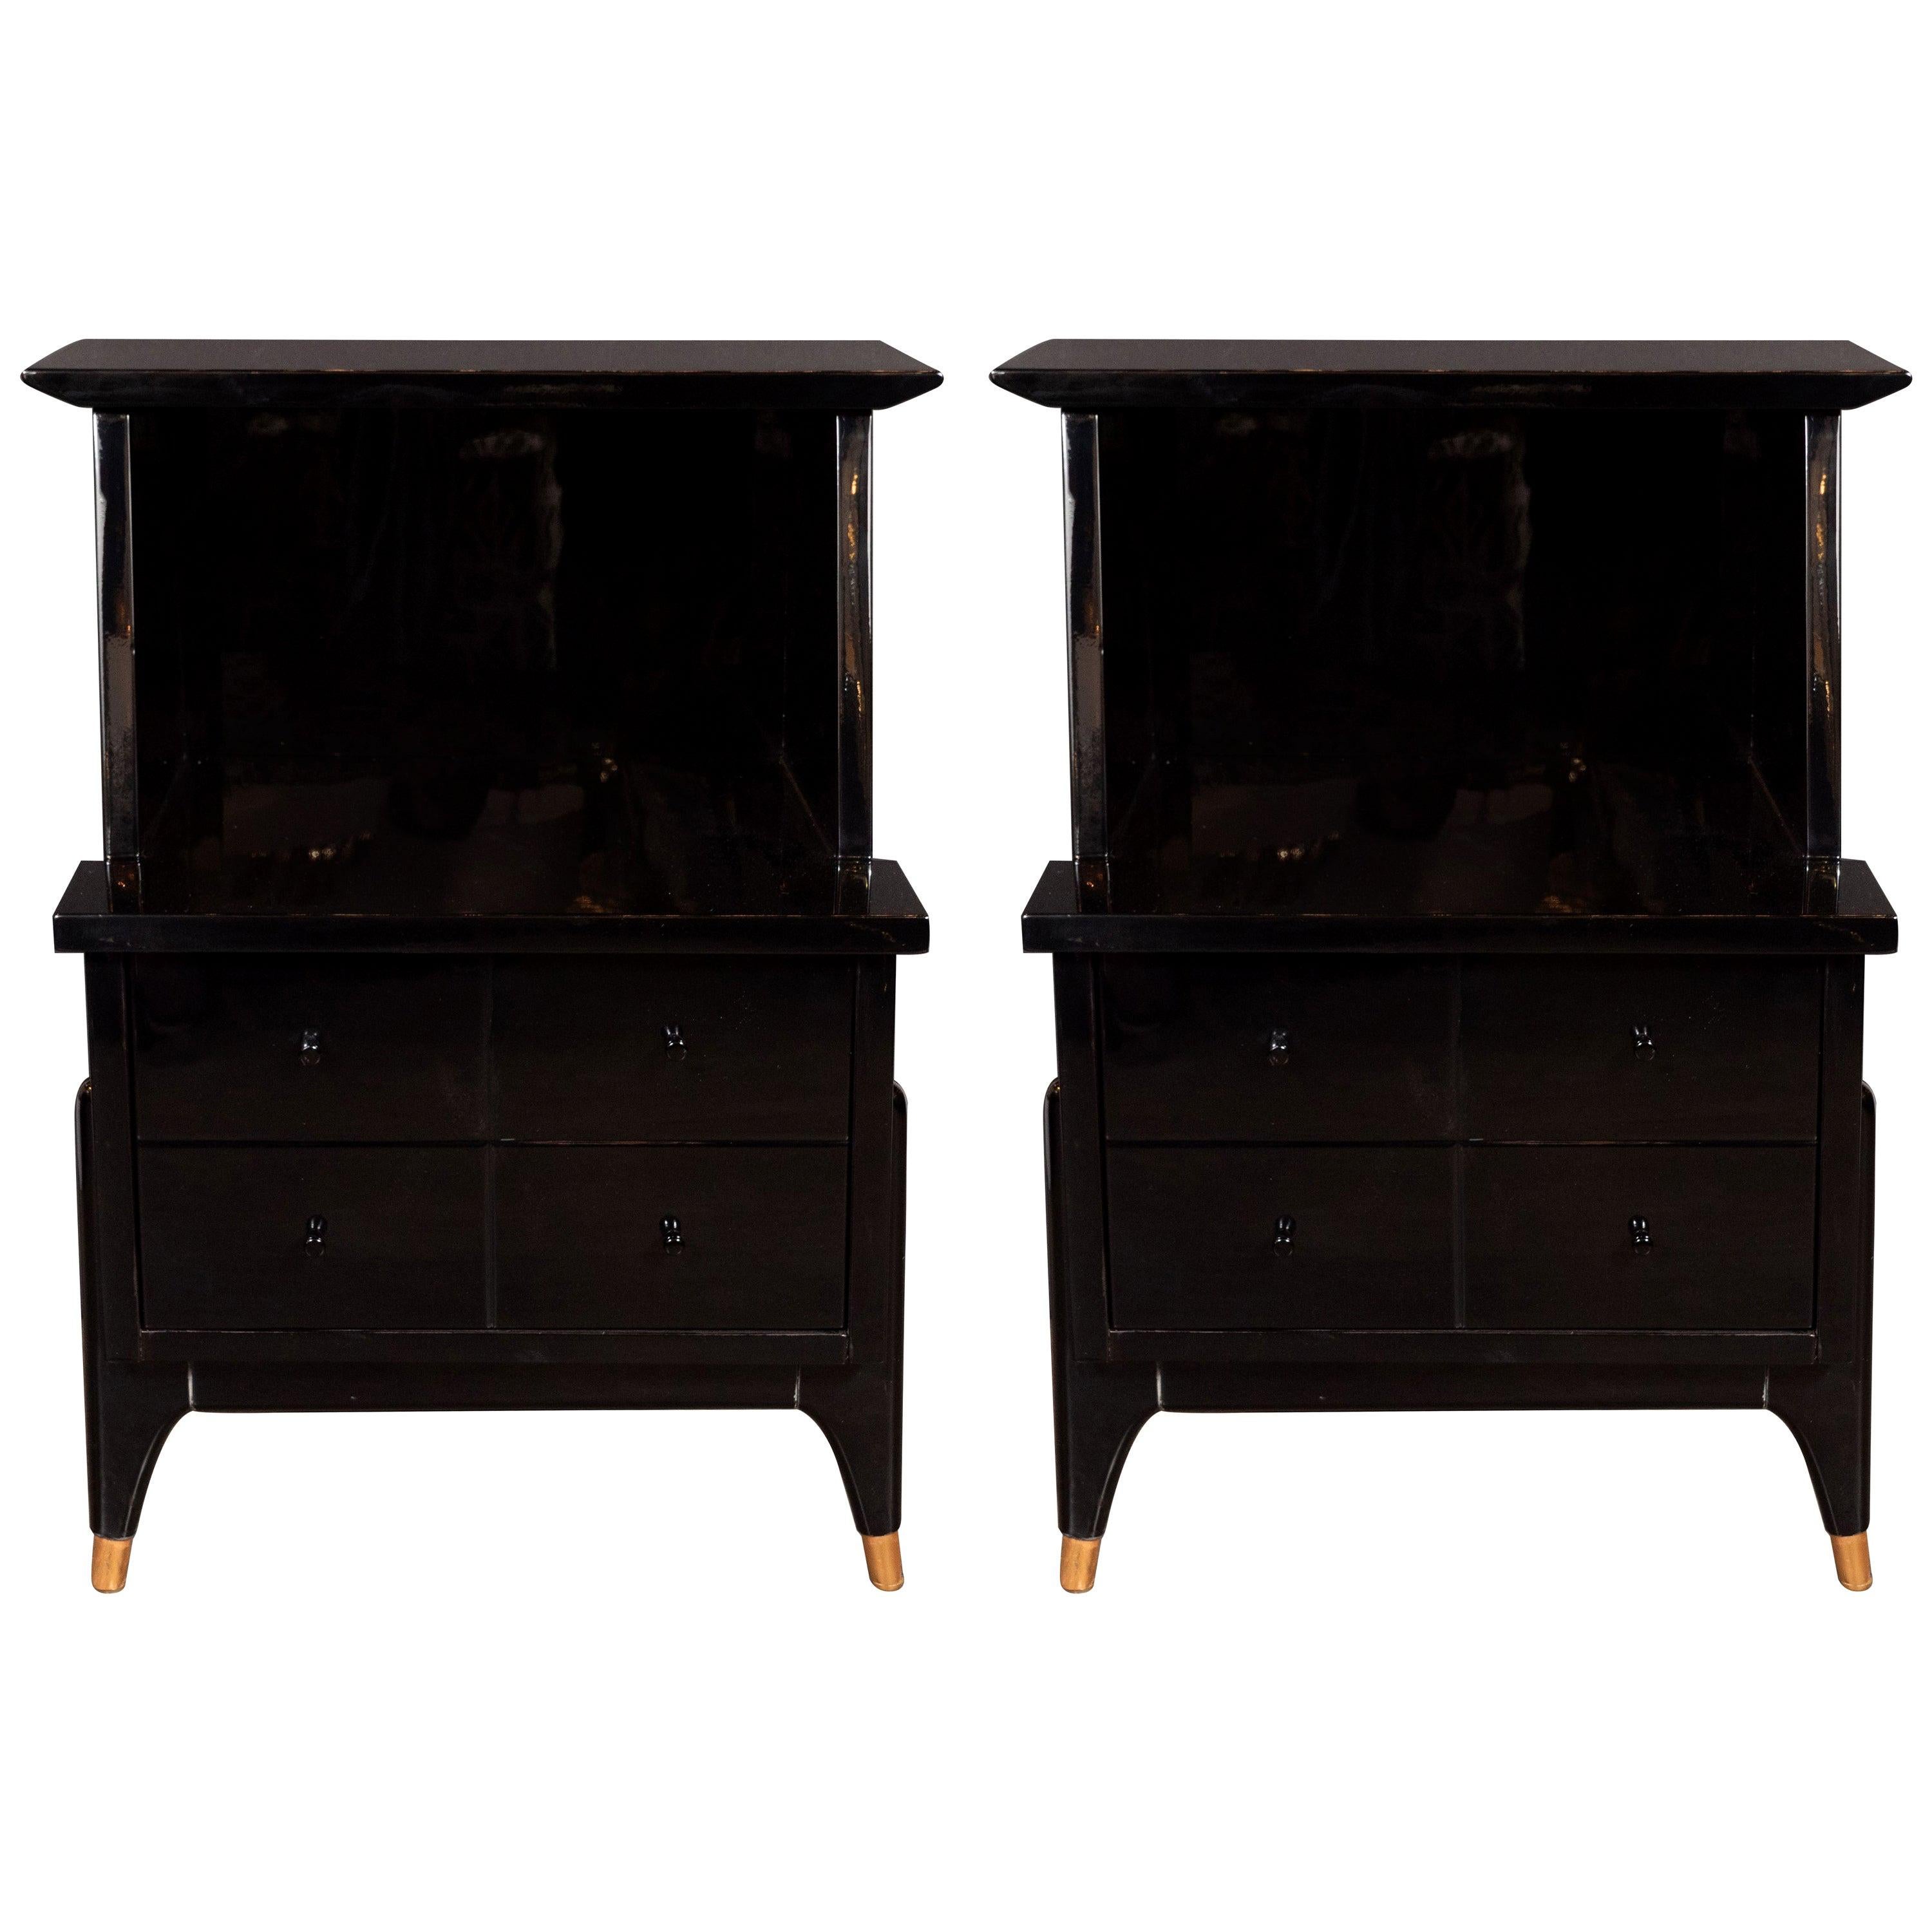 Sculptural Mid-Century Modern Nightstands/ End Tables with Brass Sabots